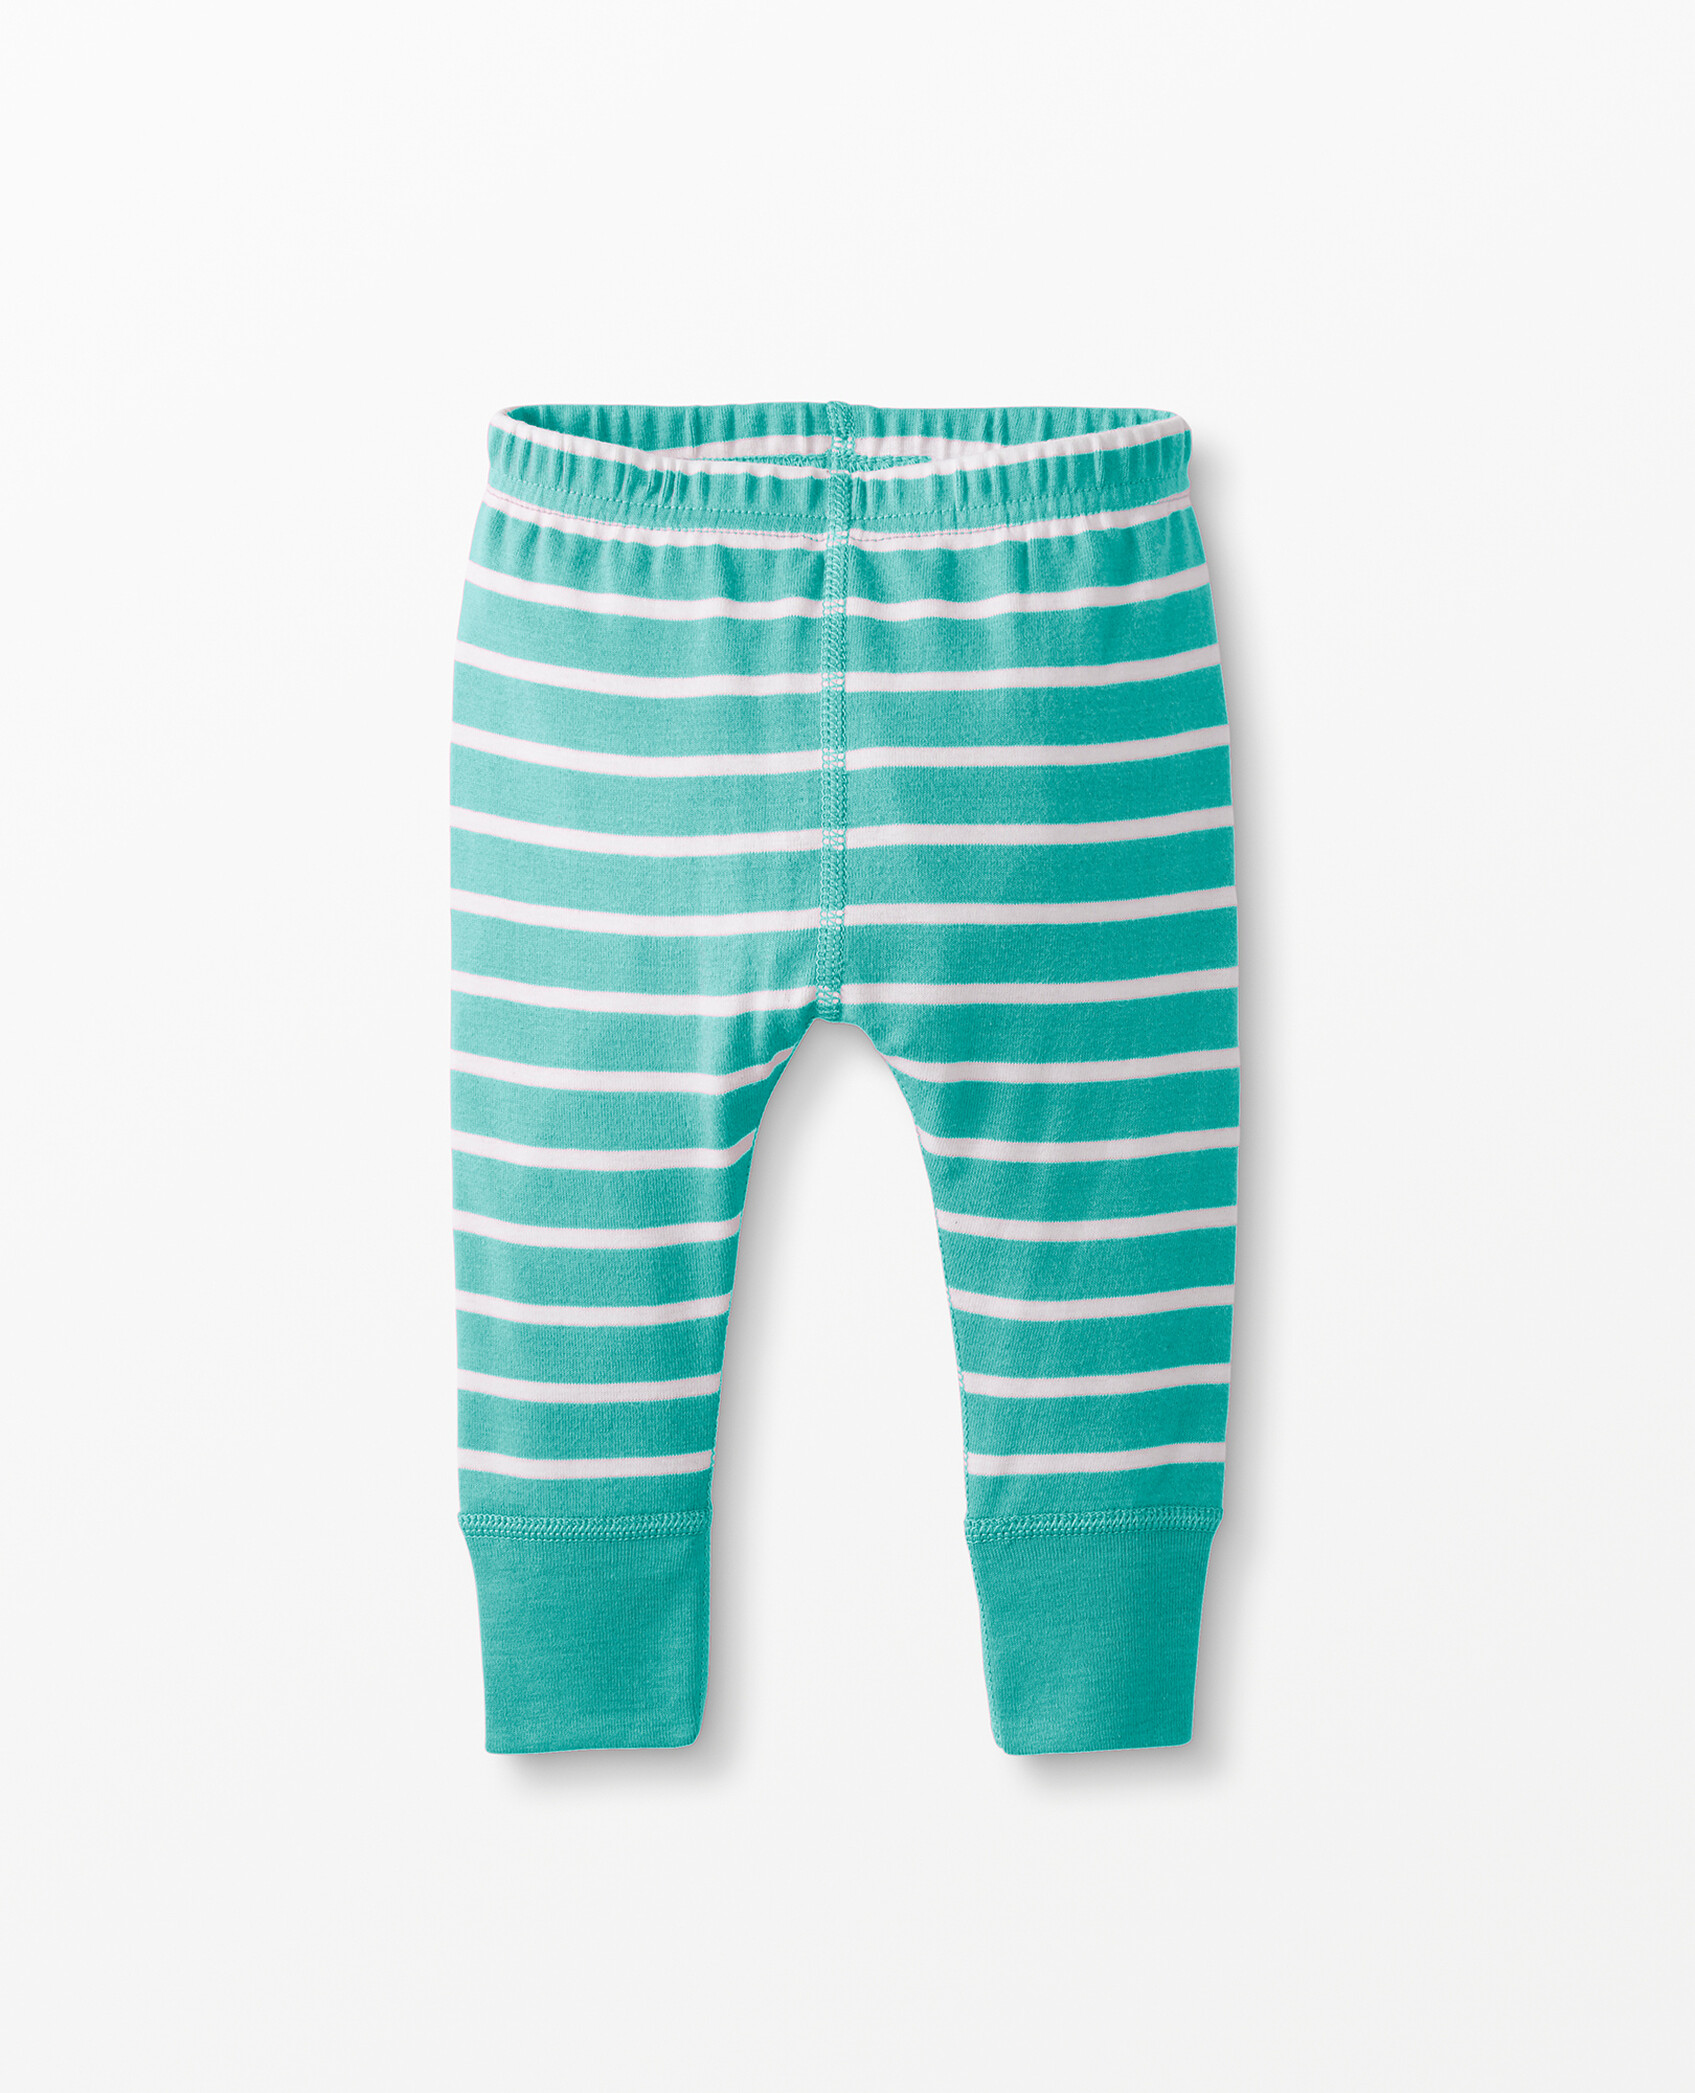 Baby Basics Wiggle Pants in Organic Cotton | Hanna Andersson